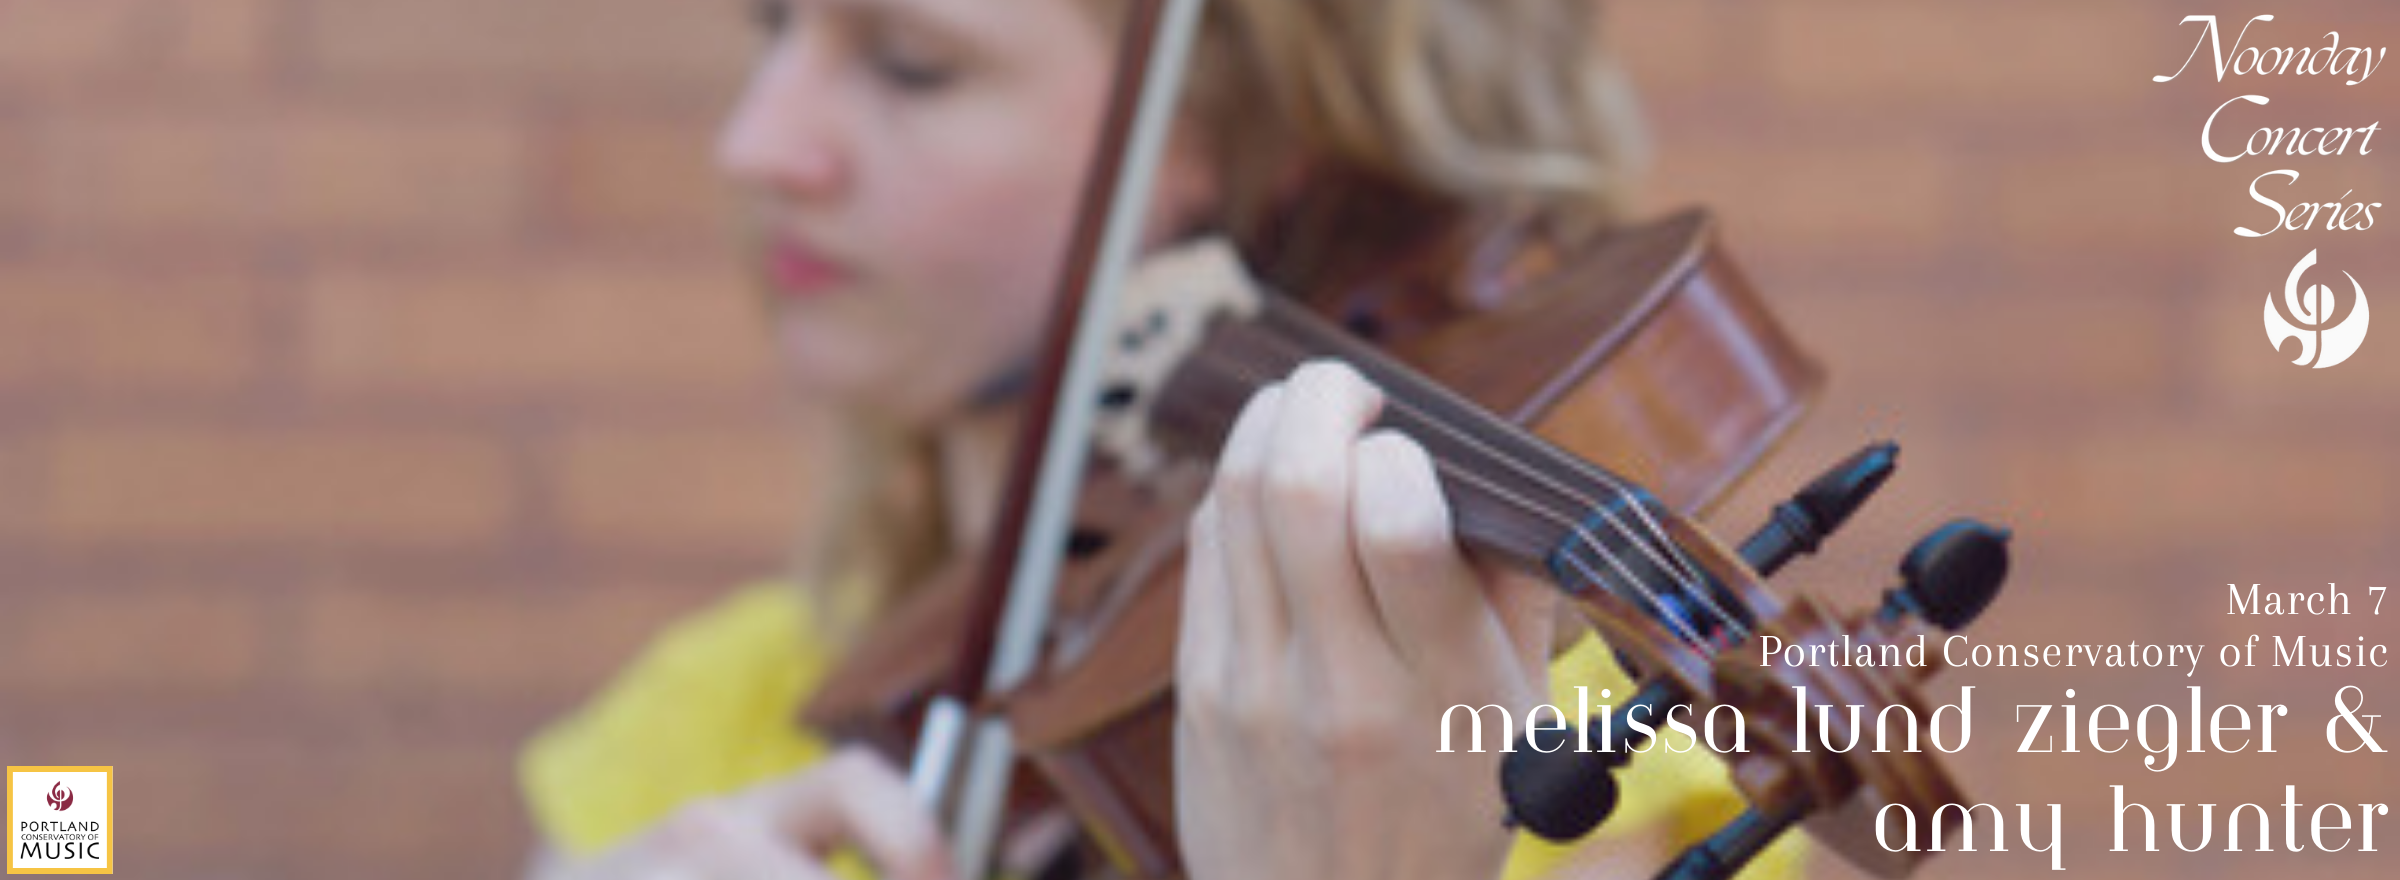 Image of Melissa Lund Ziegler playing viola with the text "Noonday concert series, March 7, Portland Conservatory of Music, Melissa Lund Ziegler and Amy Hunter"